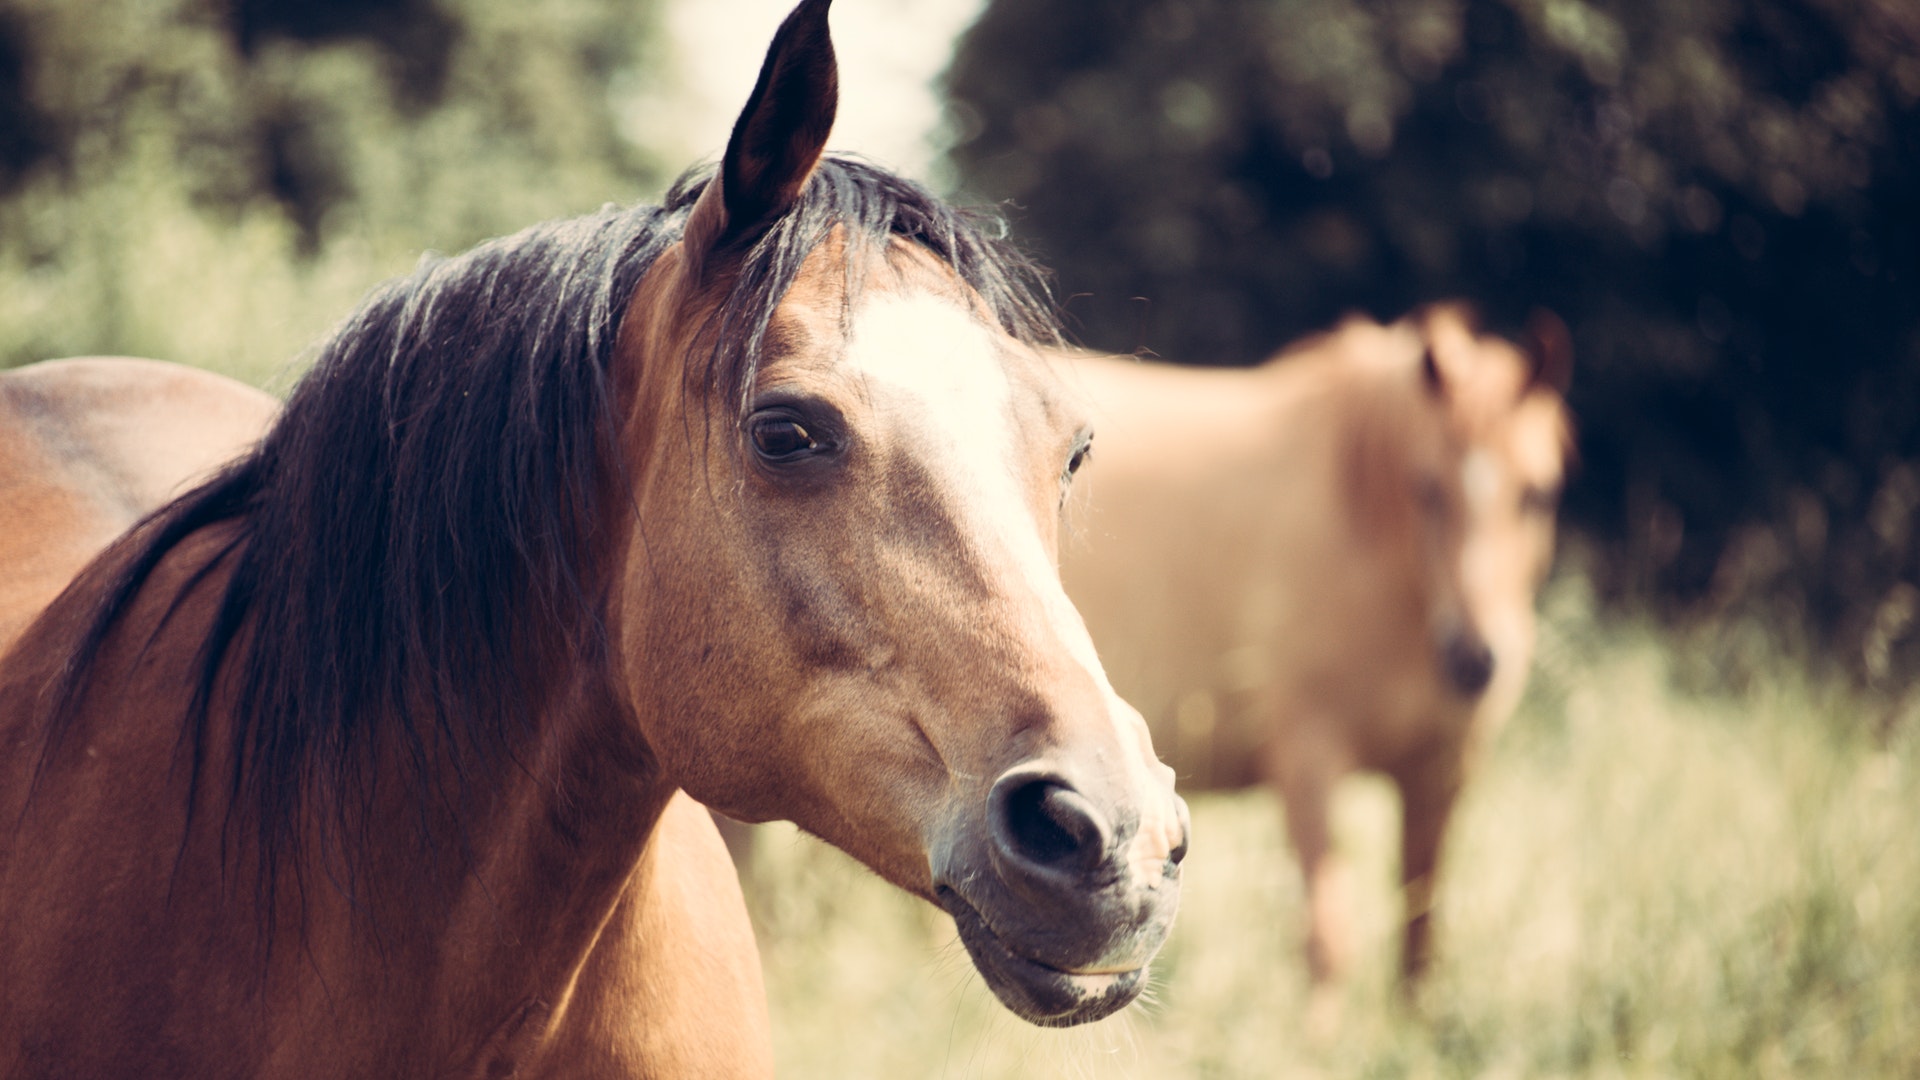 Horse Facts You Probably Didn't Know